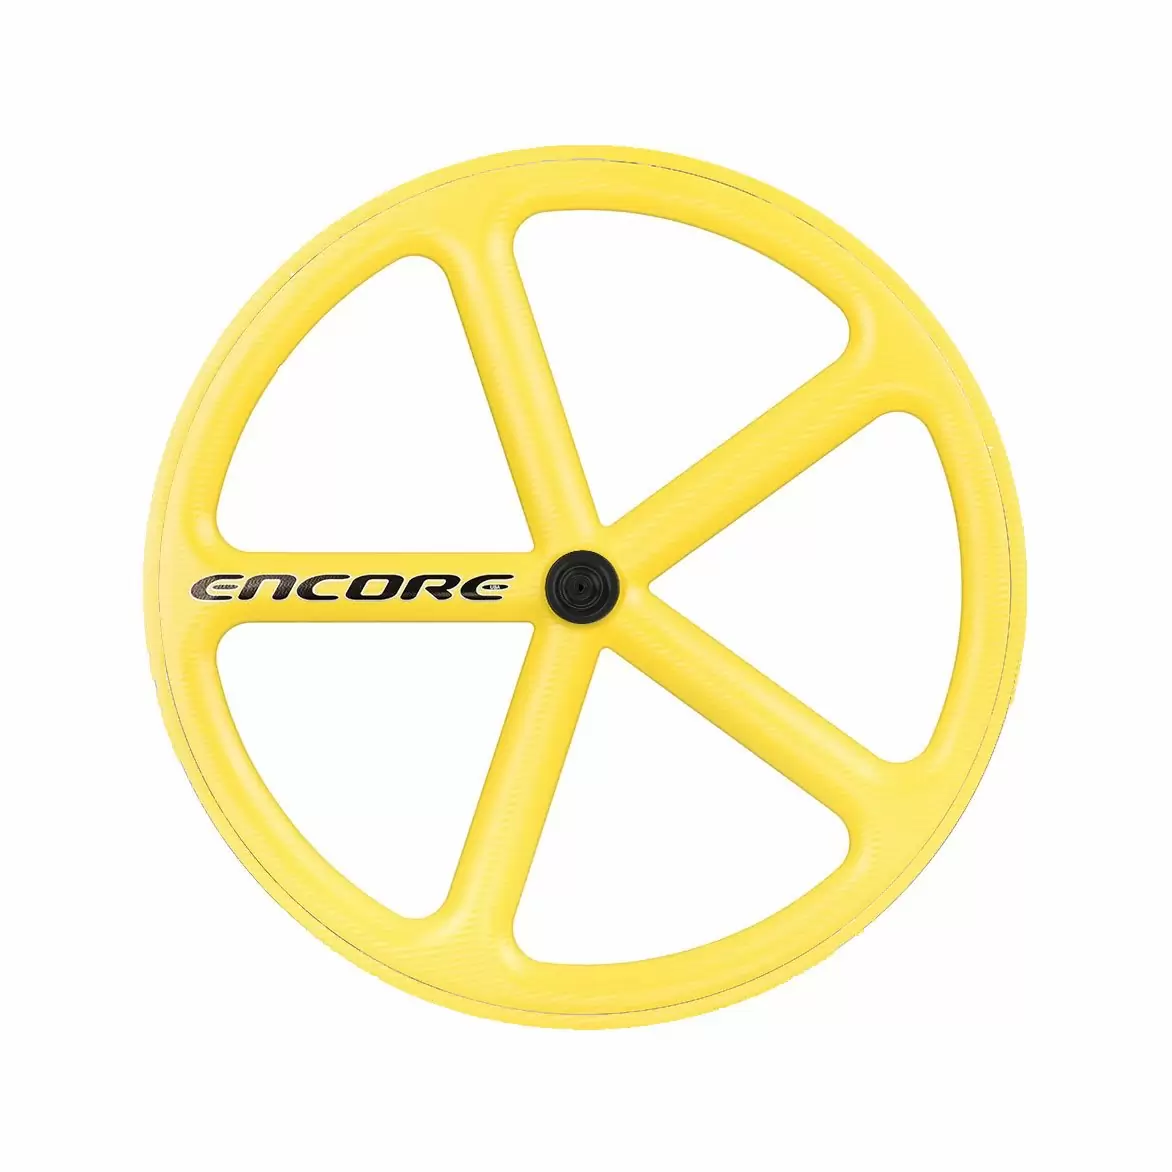 rear wheel 700c track 5 spokes carbon weave yellow nmsw - image